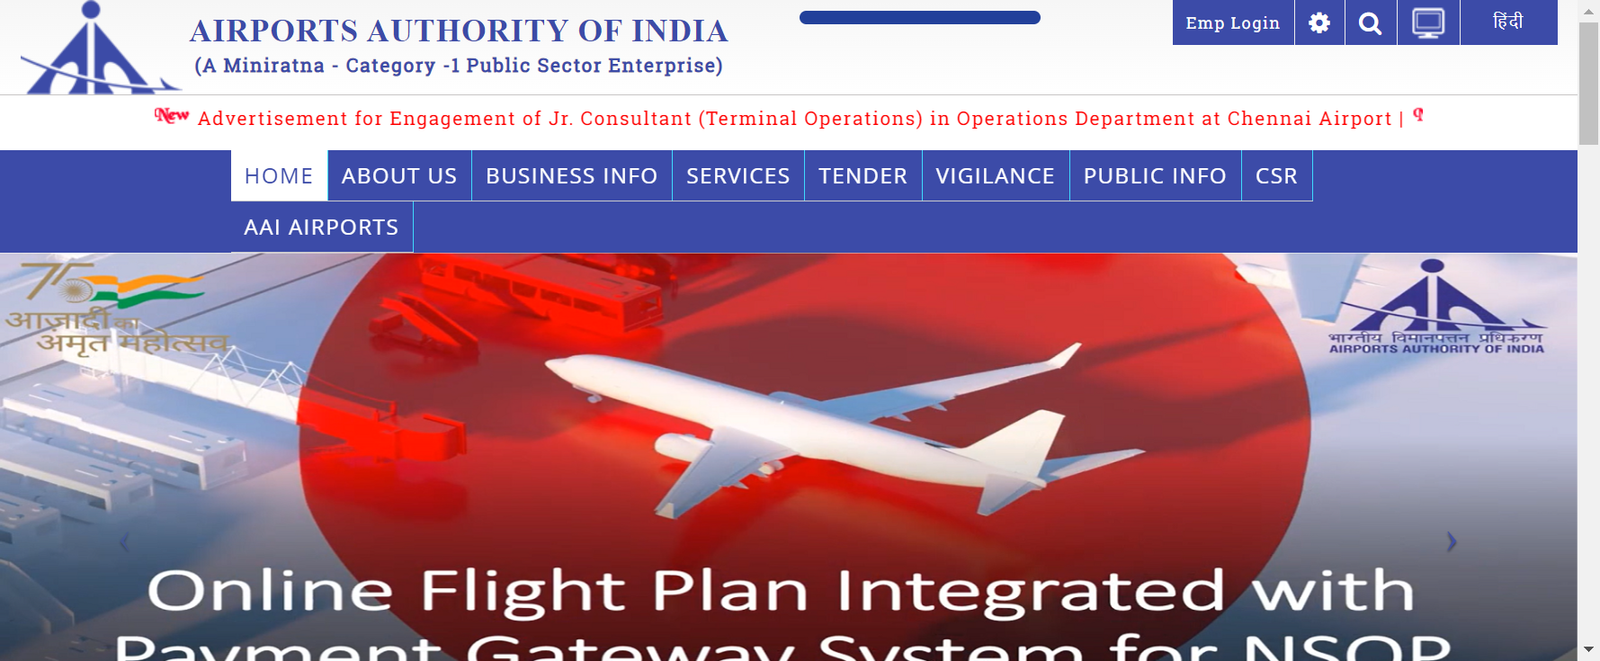 AAI Airports Authority of India